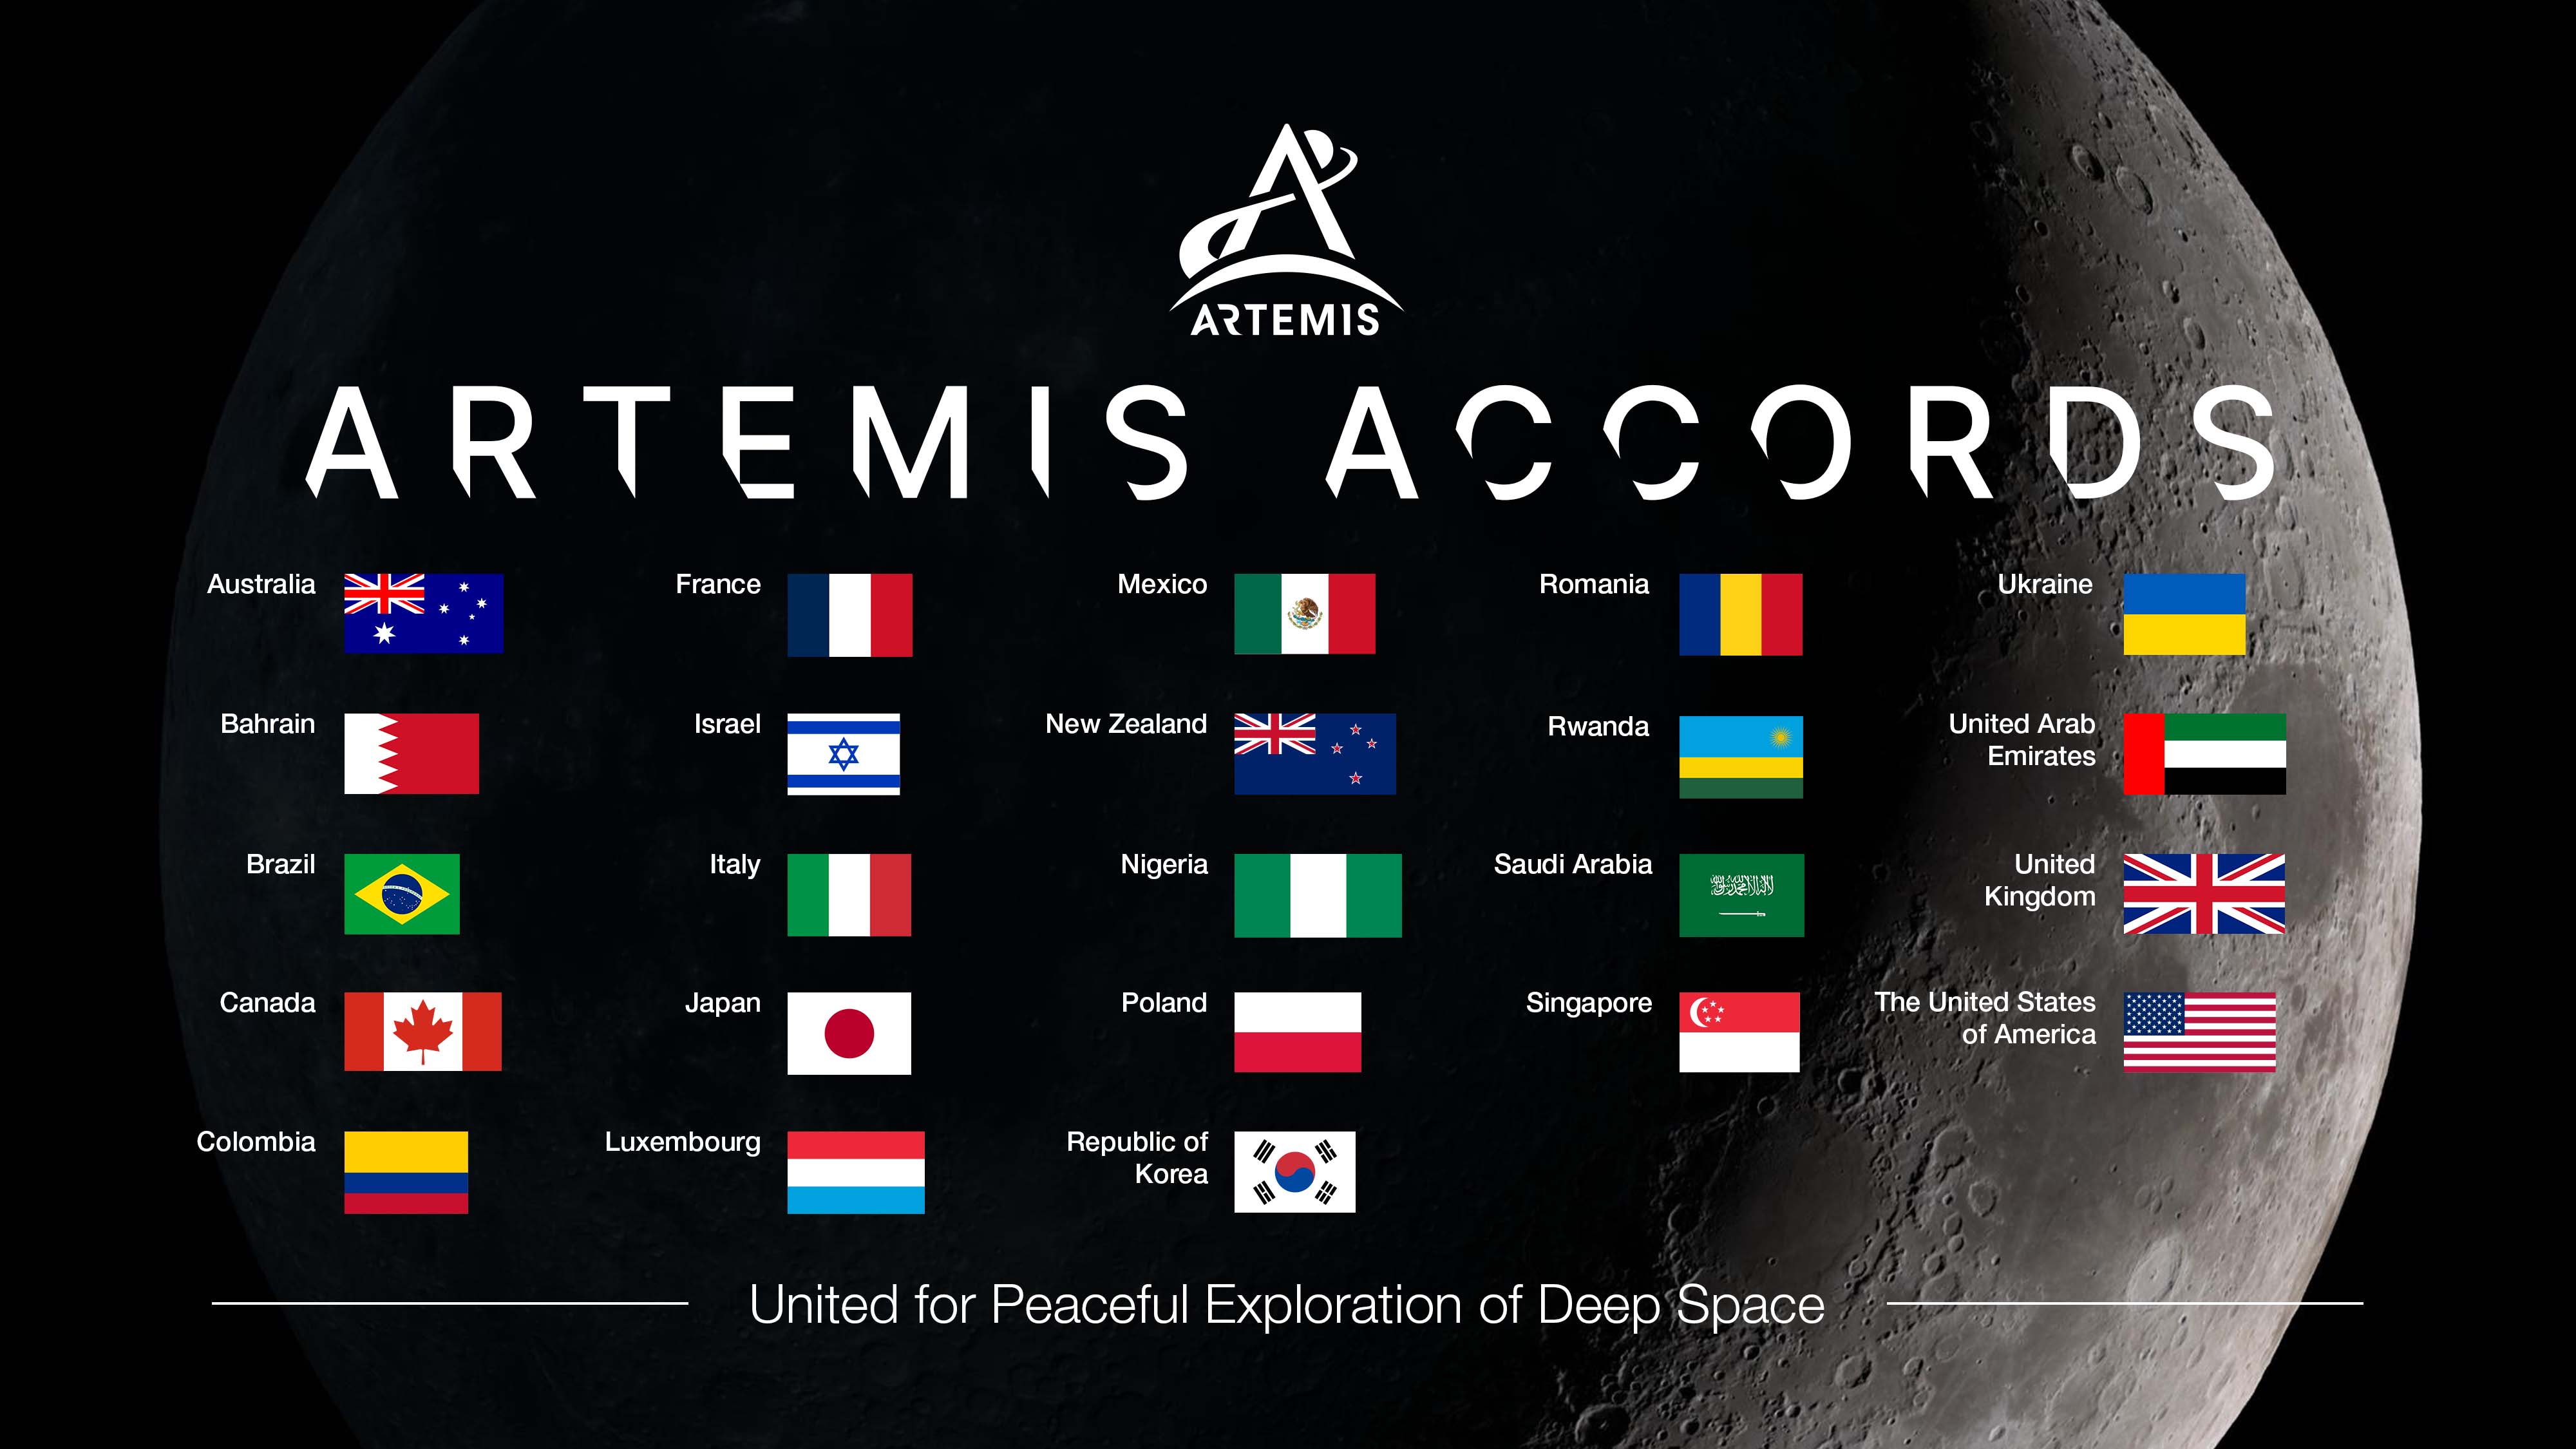 A graphic showing the countries that have signed the Artemis Agreement.